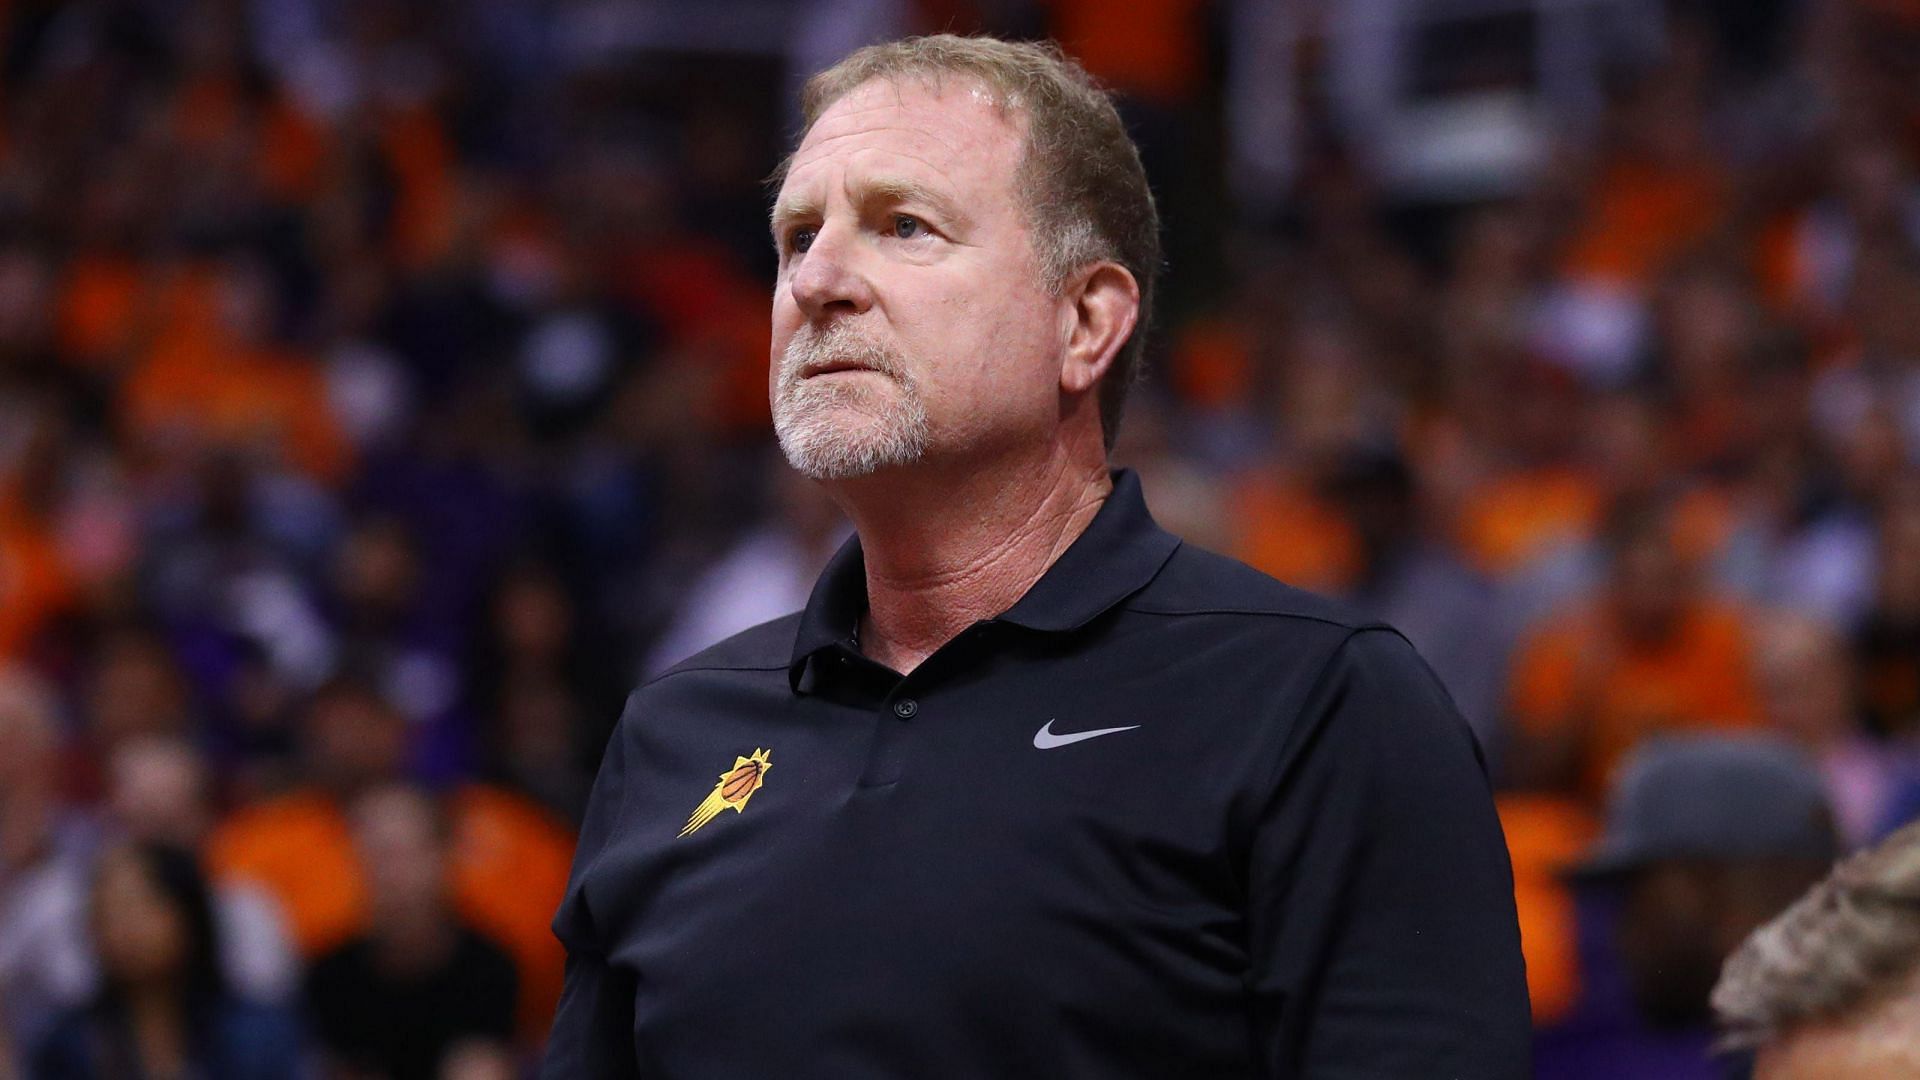 Phoenix Suns owner Robert Sarver has found himself in hot water with the NBA.